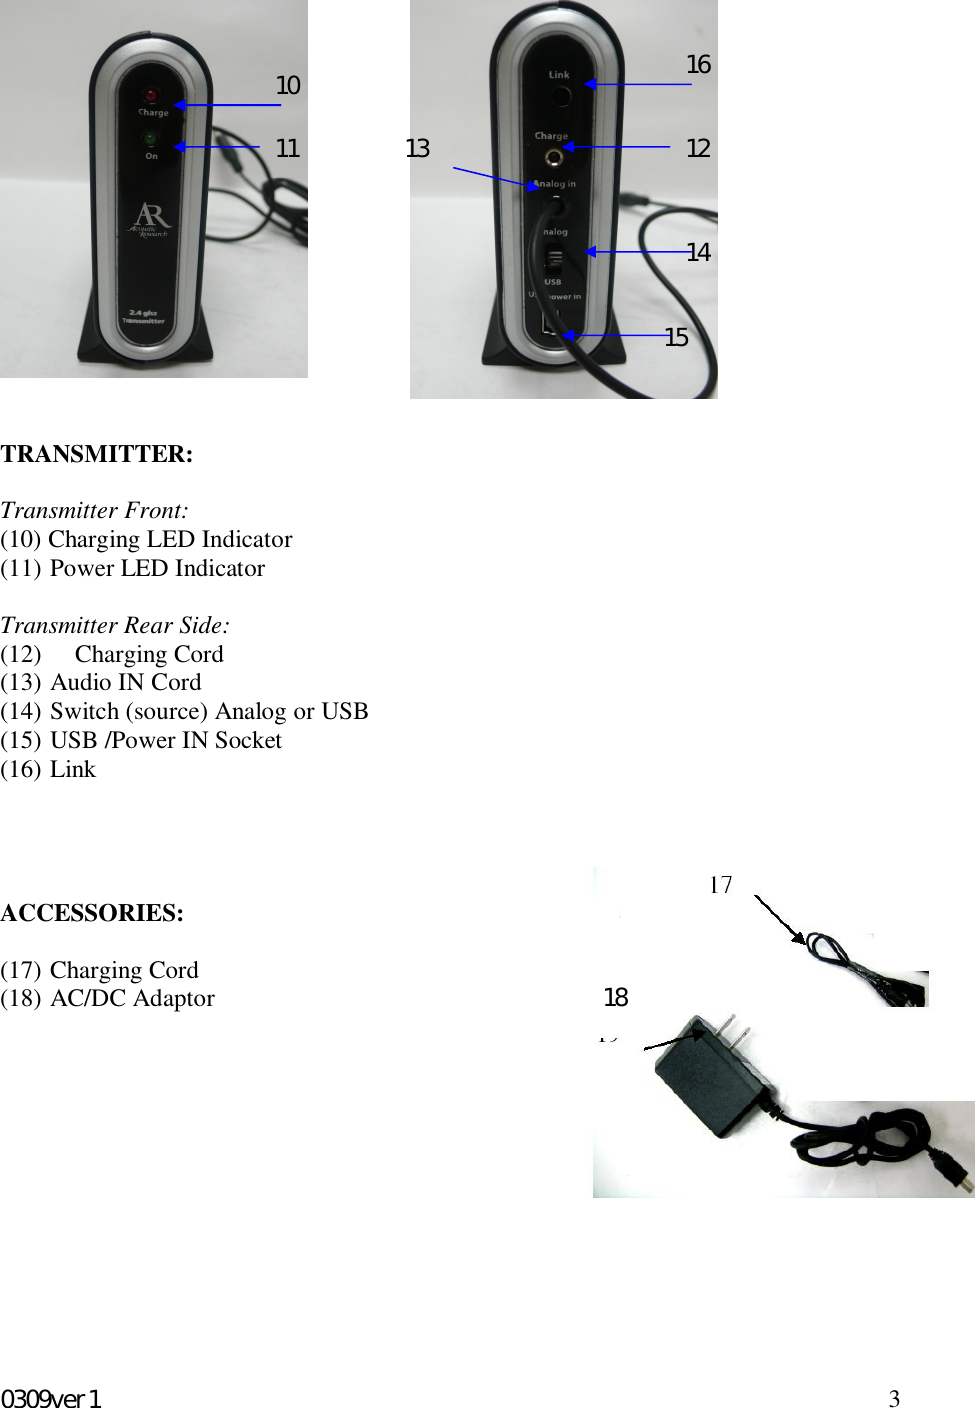 0309ver1 3TRANSMITTER:Transmitter Front:(10) Charging LED Indicator(11) Power LED IndicatorTransmitter Rear Side:(12) Charging Cord(13) Audio IN Cord(14) Switch (source) Analog or USB(15) USB /Power IN Socket(16) LinkACCESSORIES:(17) Charging Cord(18) AC/DC Adaptor1011 121314151618